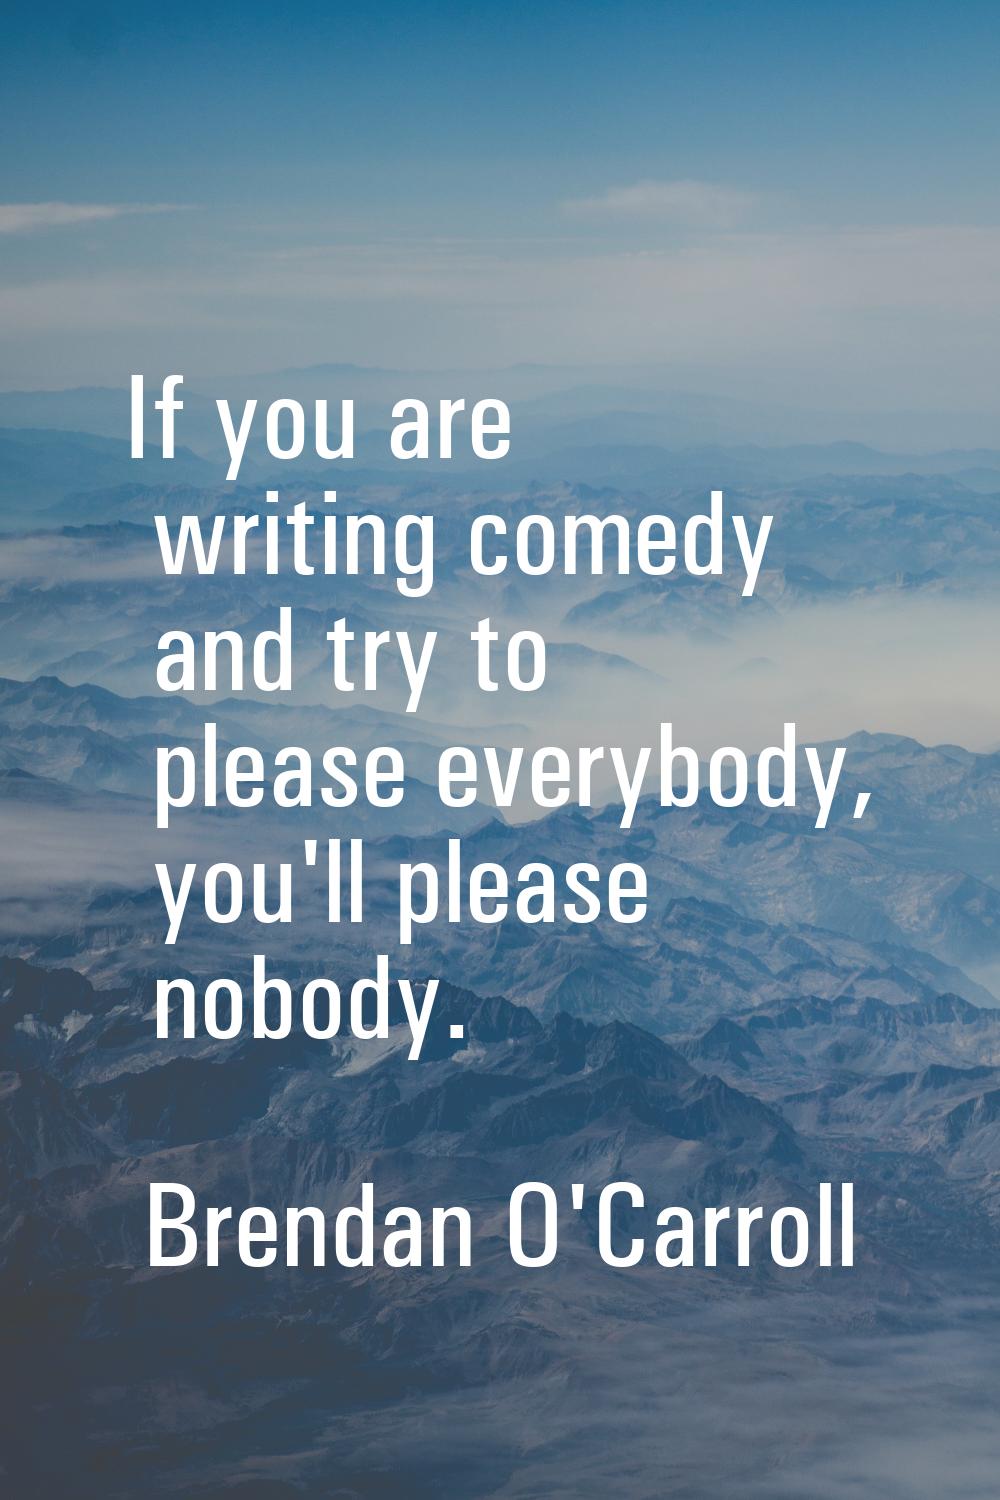 If you are writing comedy and try to please everybody, you'll please nobody.